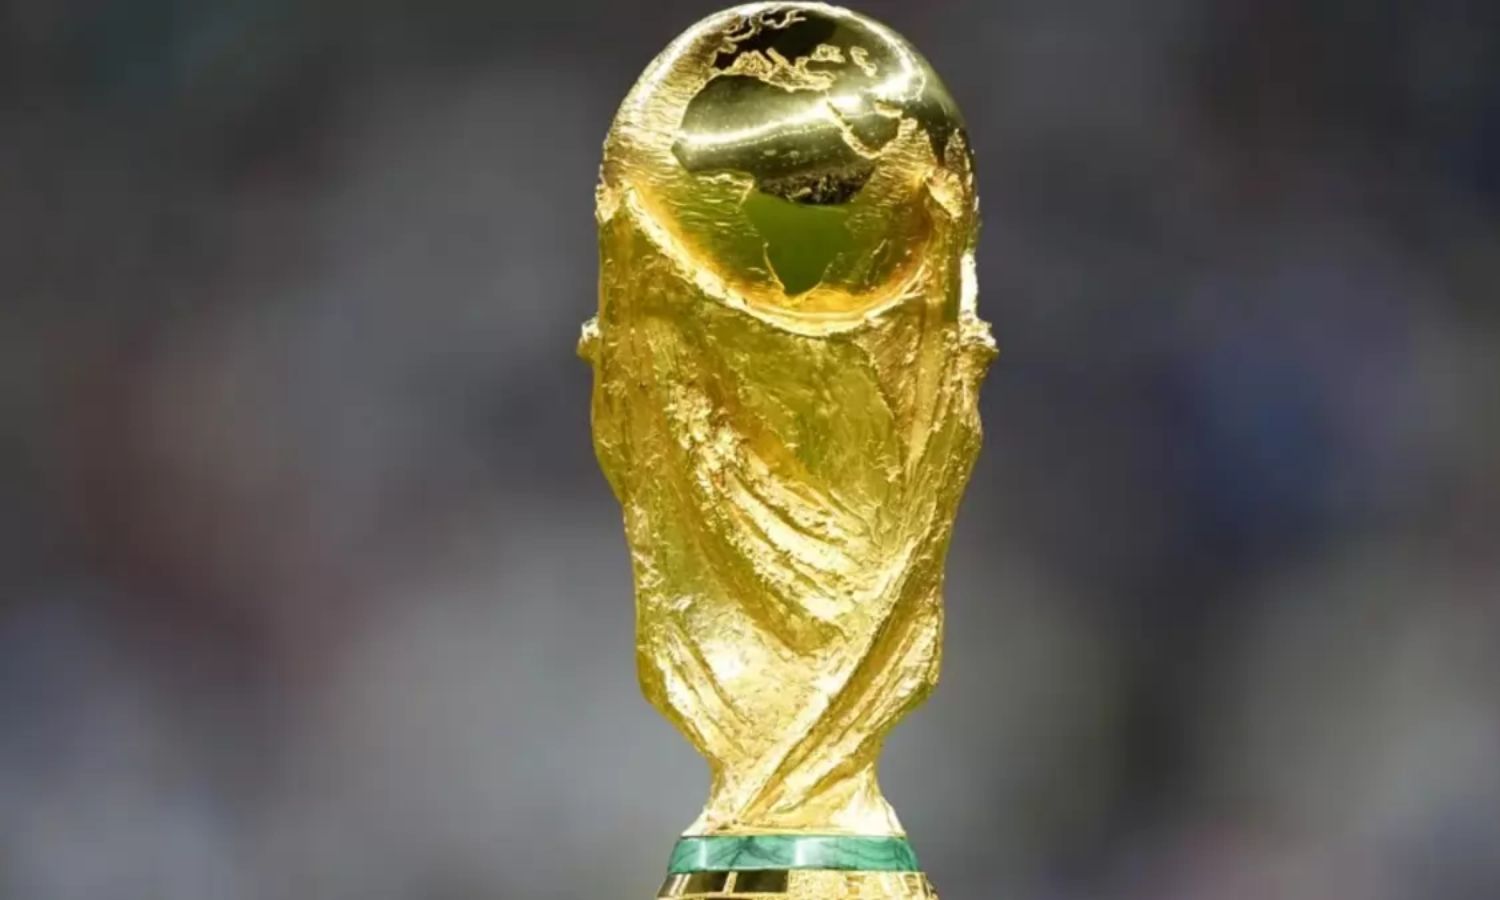 Most players dont want a repeat of FIFA World Cup 2022 held in Qatar